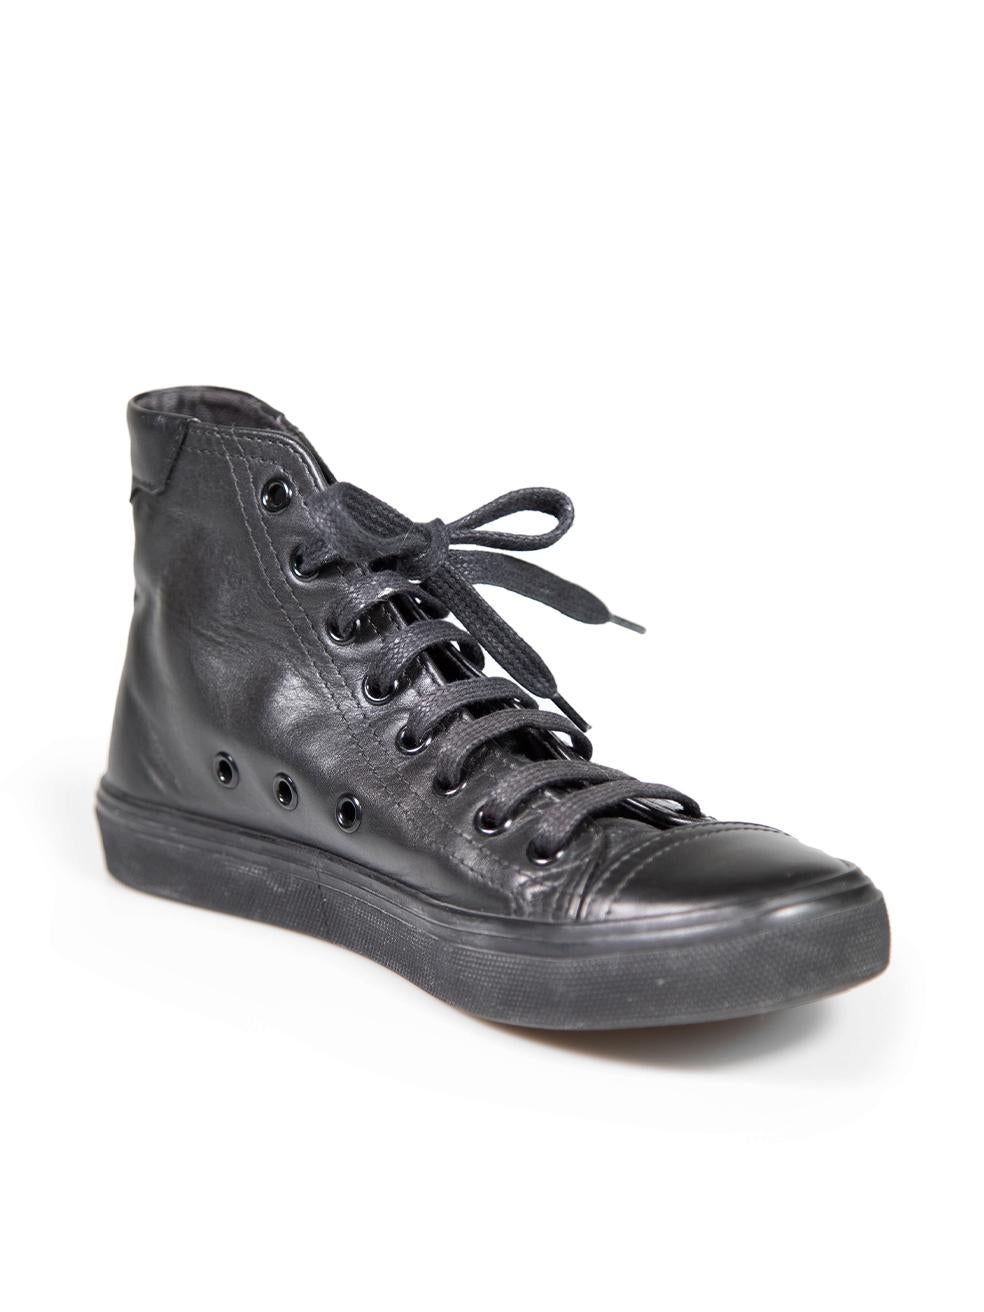 CONDITION is Very good. Minimal wear of trainers is evident. Minimal scratches to the back of both shoes and on the front of the right shoe on this used Saint Laurent designer resale item.
 
 
 
 Details
 
 
 Black
 
 Leather
 
 Trainers
 
 High